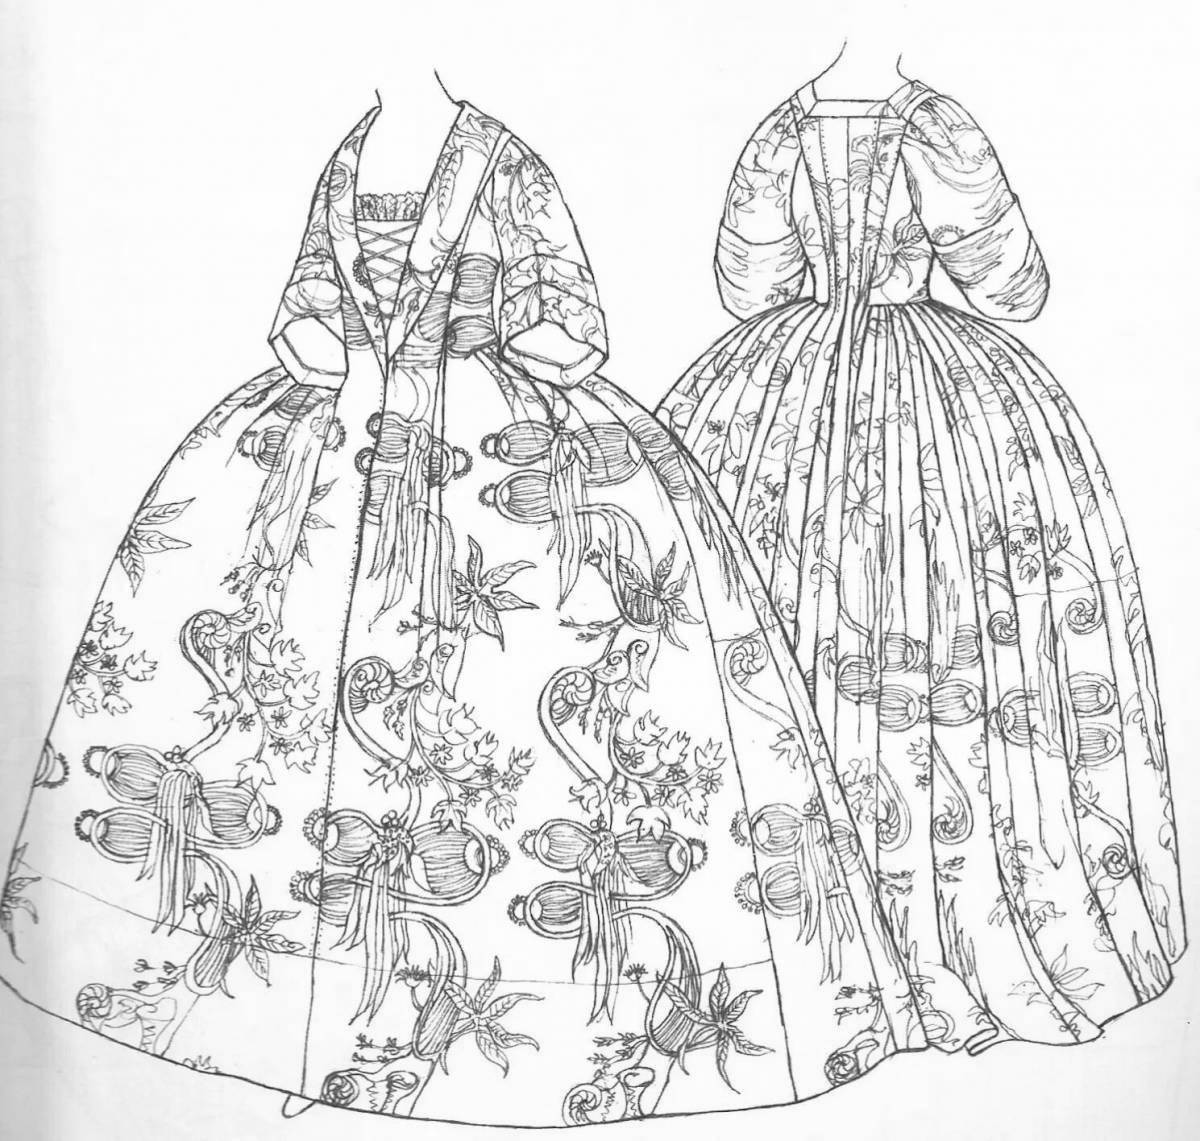 Coloring page fine 18th century costume